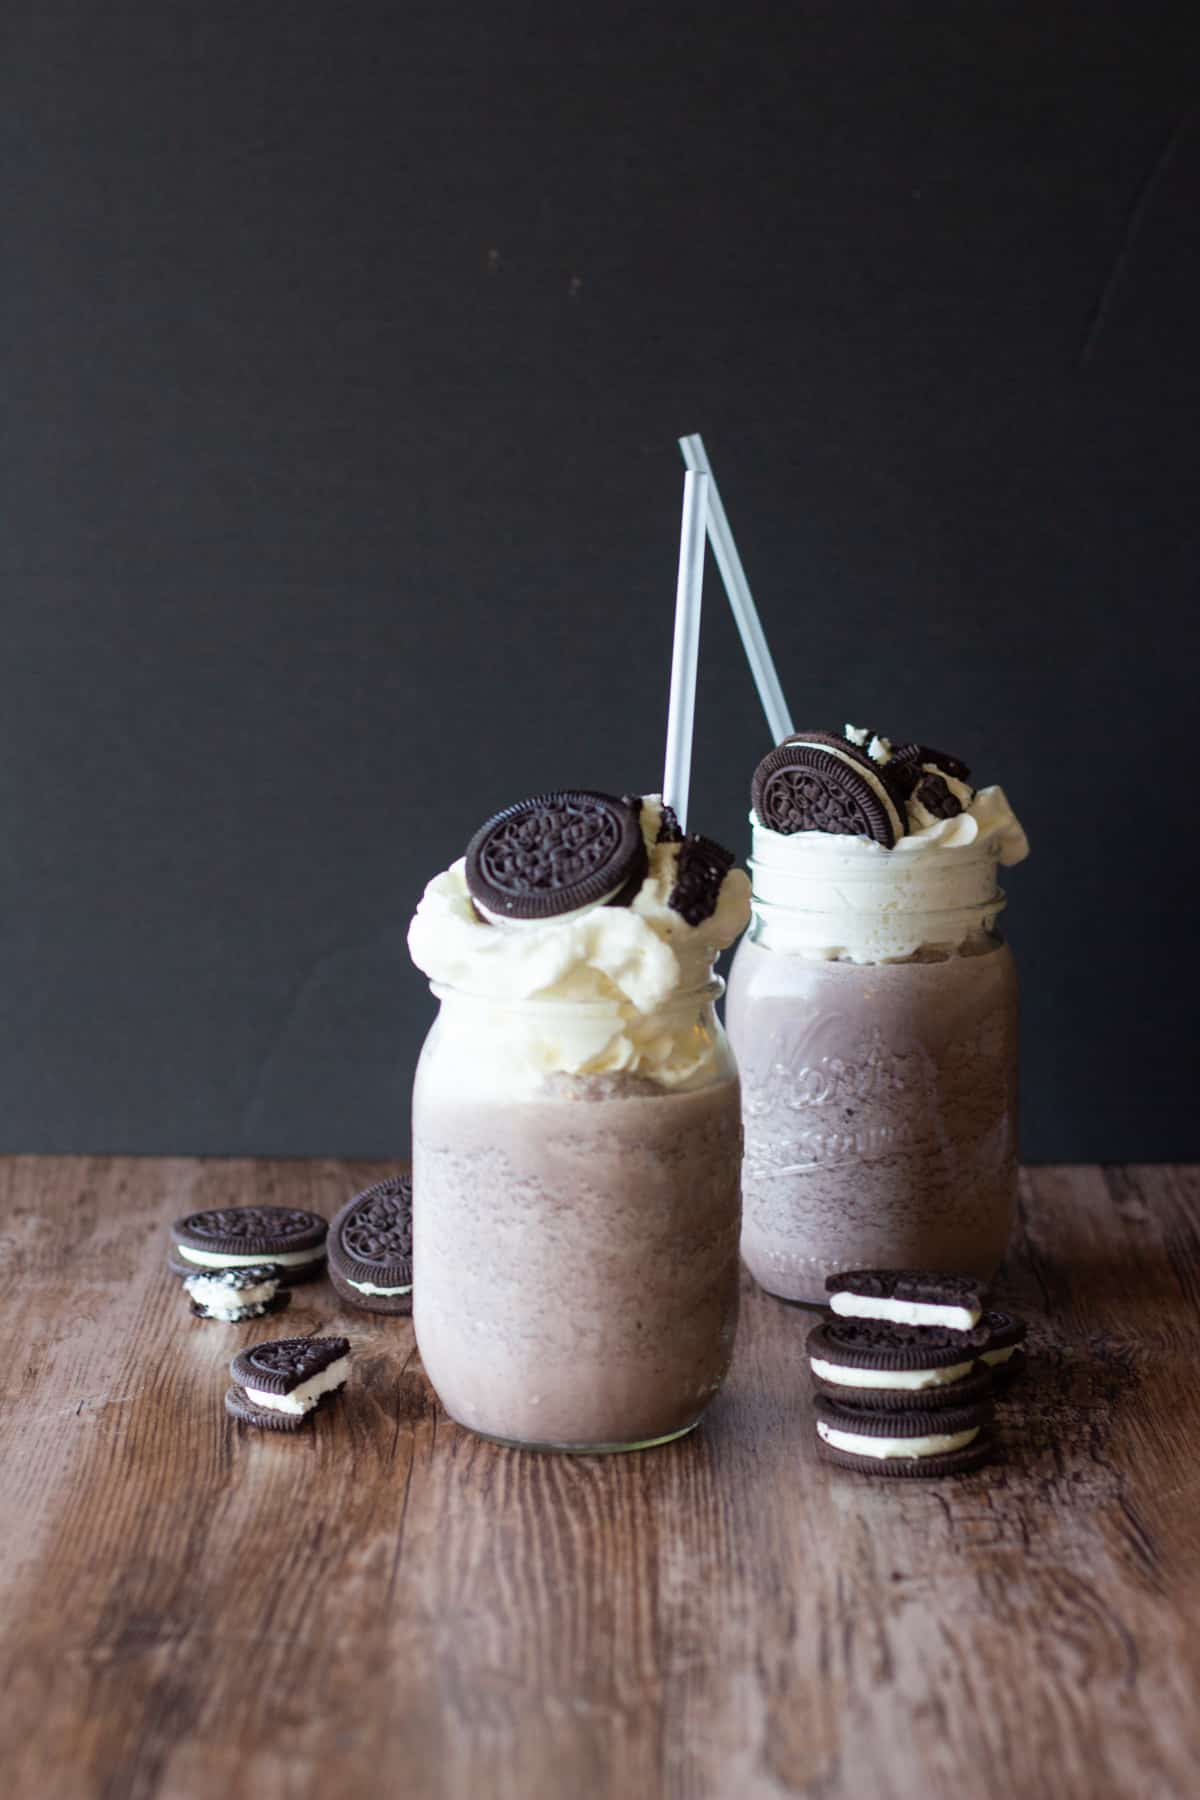 With some oreos, ice cream and milk you can have the most delicious oreo milkshake! 